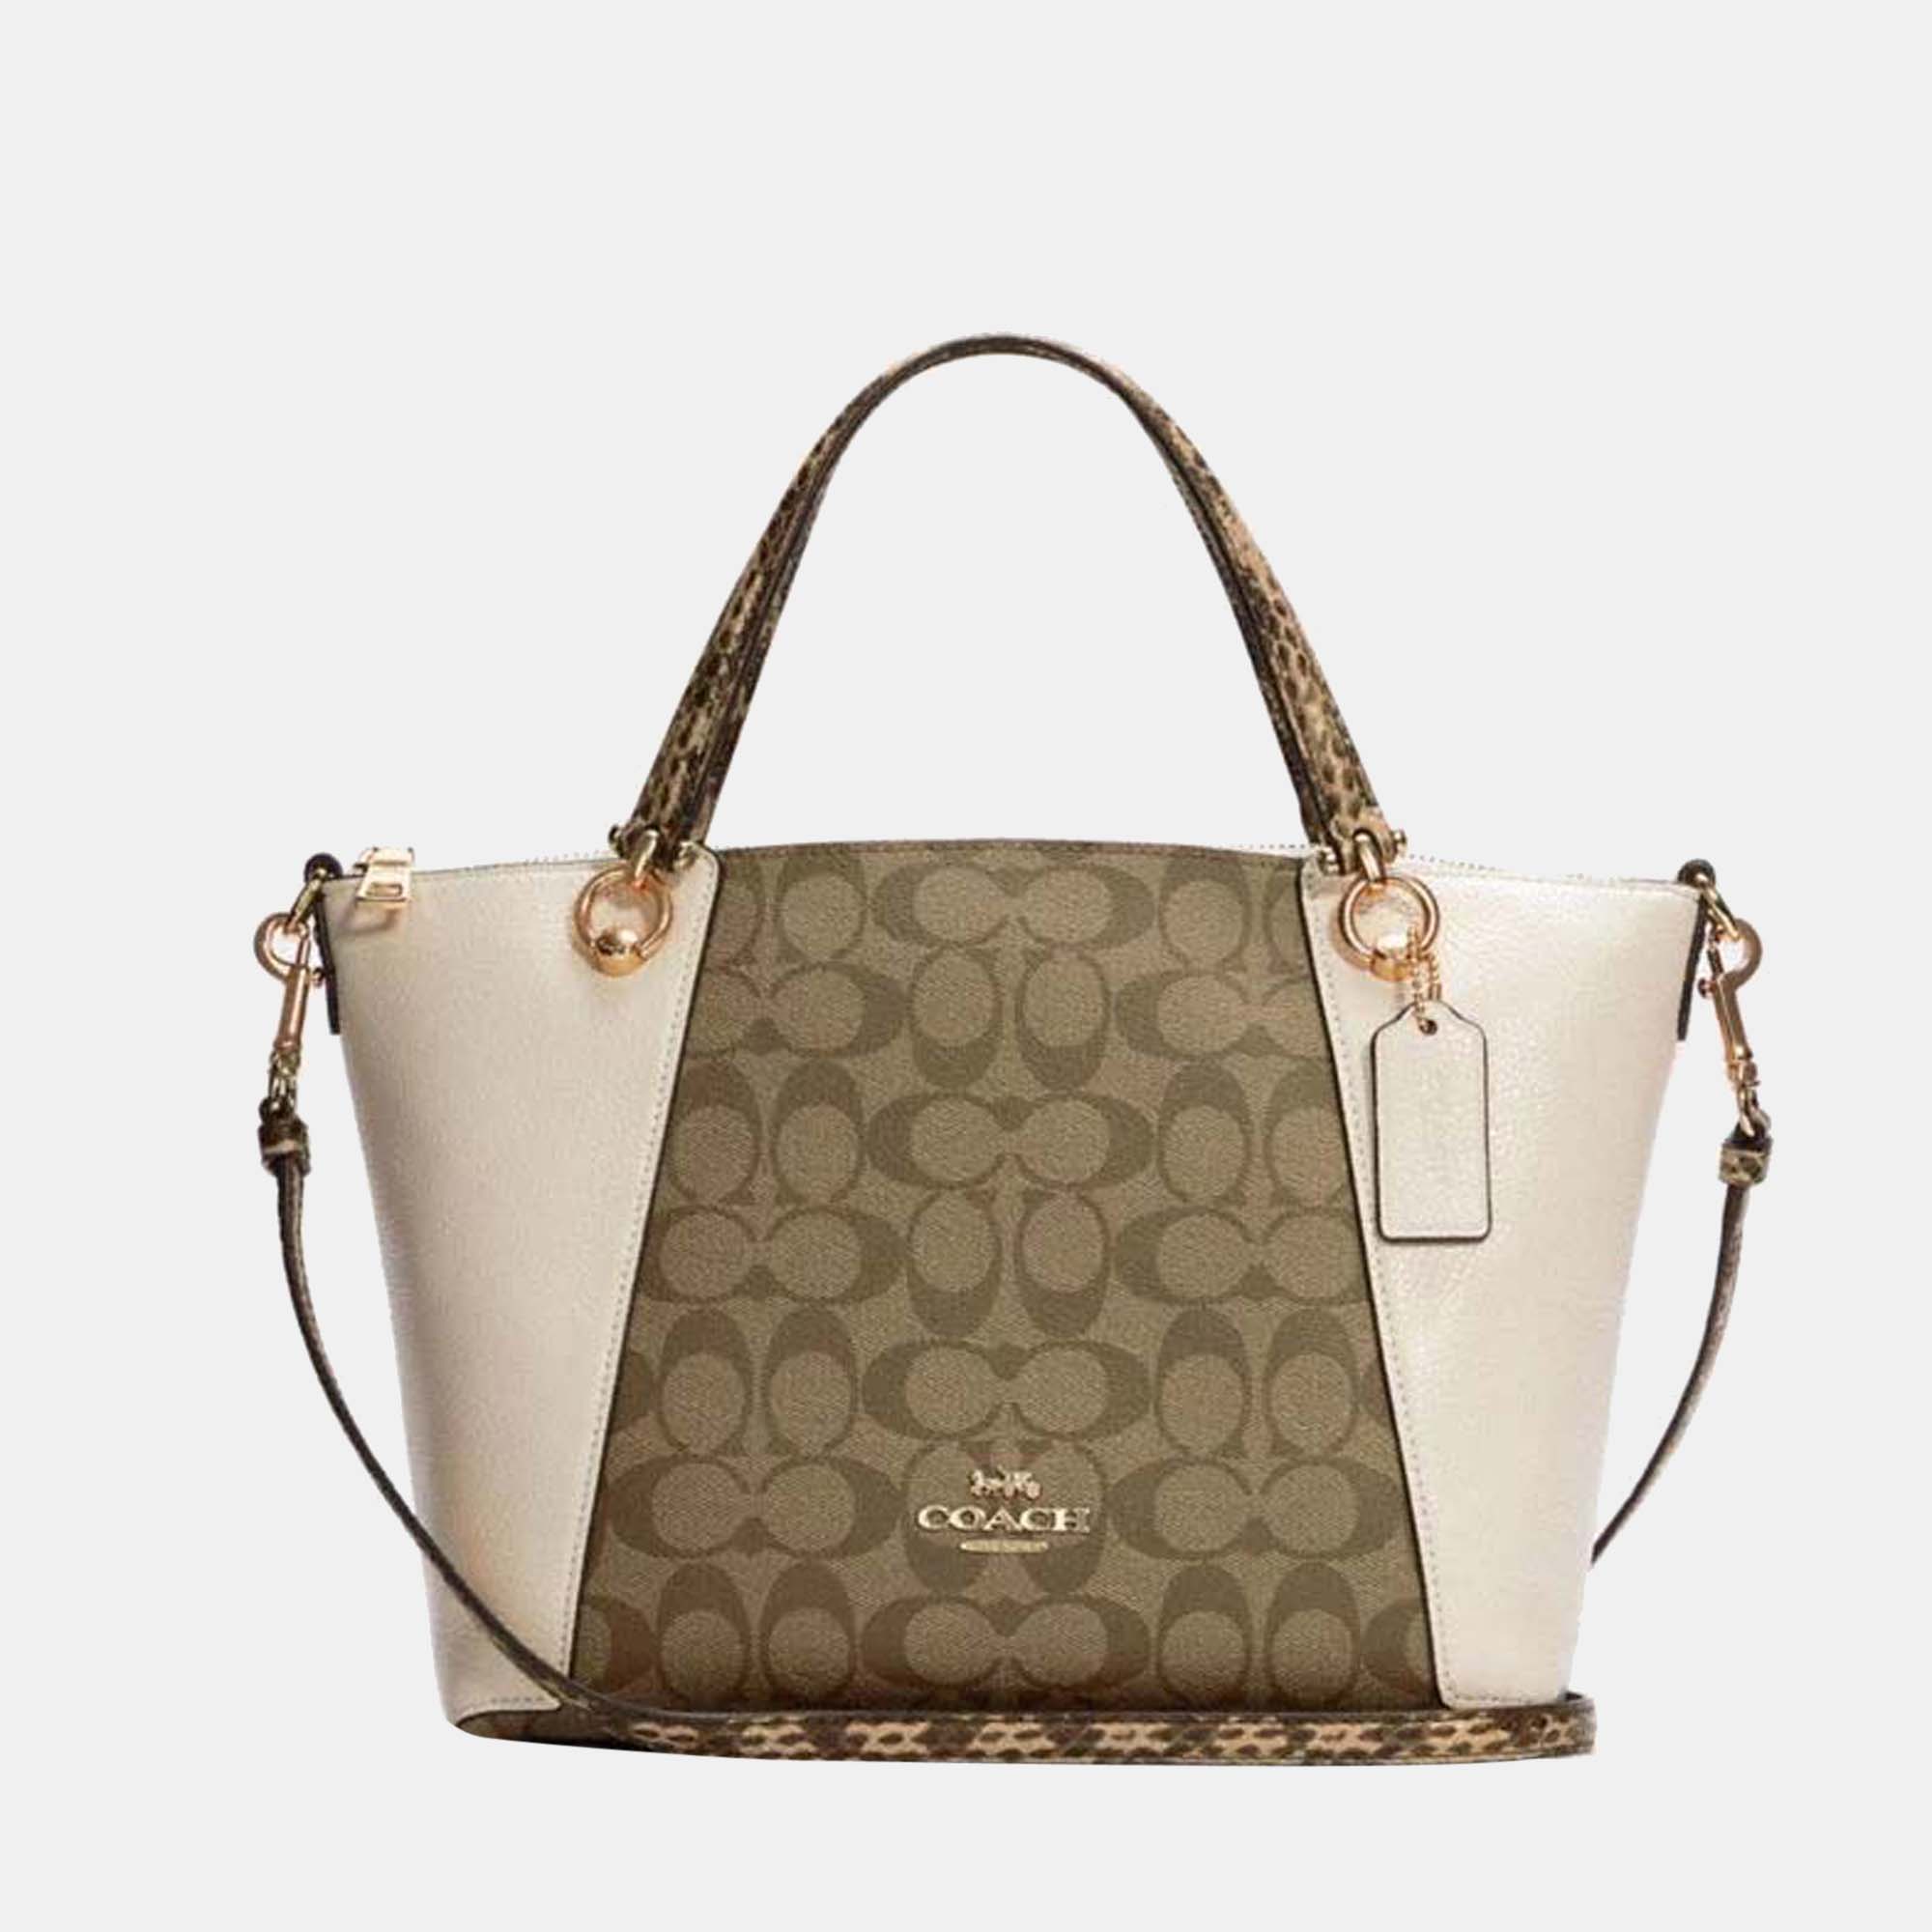 Coach White/Brown Signature Canvas & Snake Embossed Leather Kacey Satchel Bag